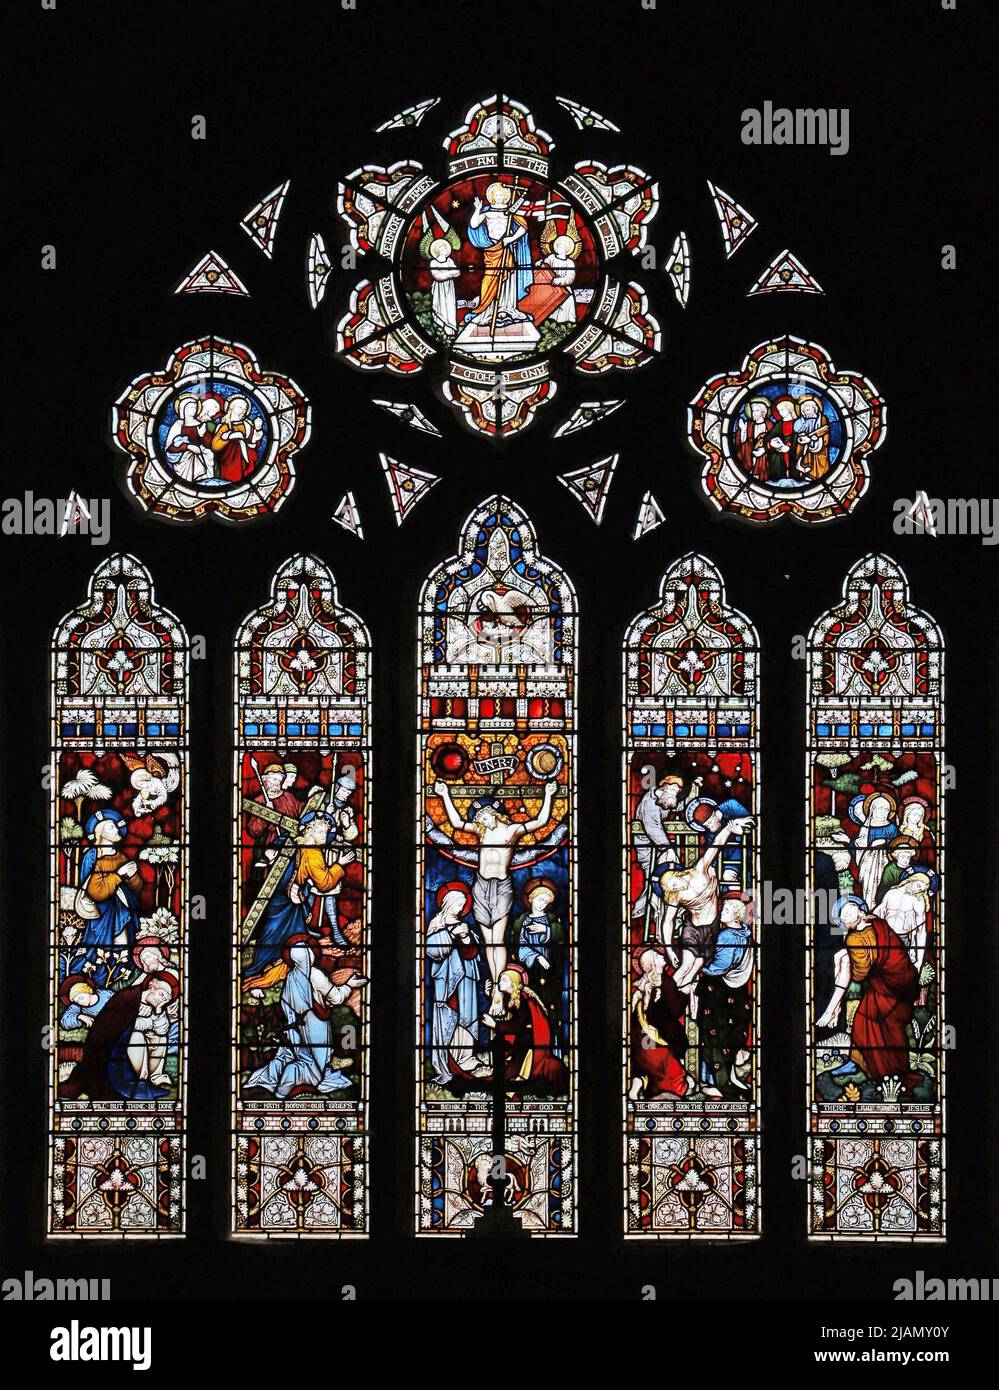 A stained glass window by Clayton & Bell (1879) depicting The Passion of Christ, St Nicholas's Church, Alcester, Warwickshire Stock Photo